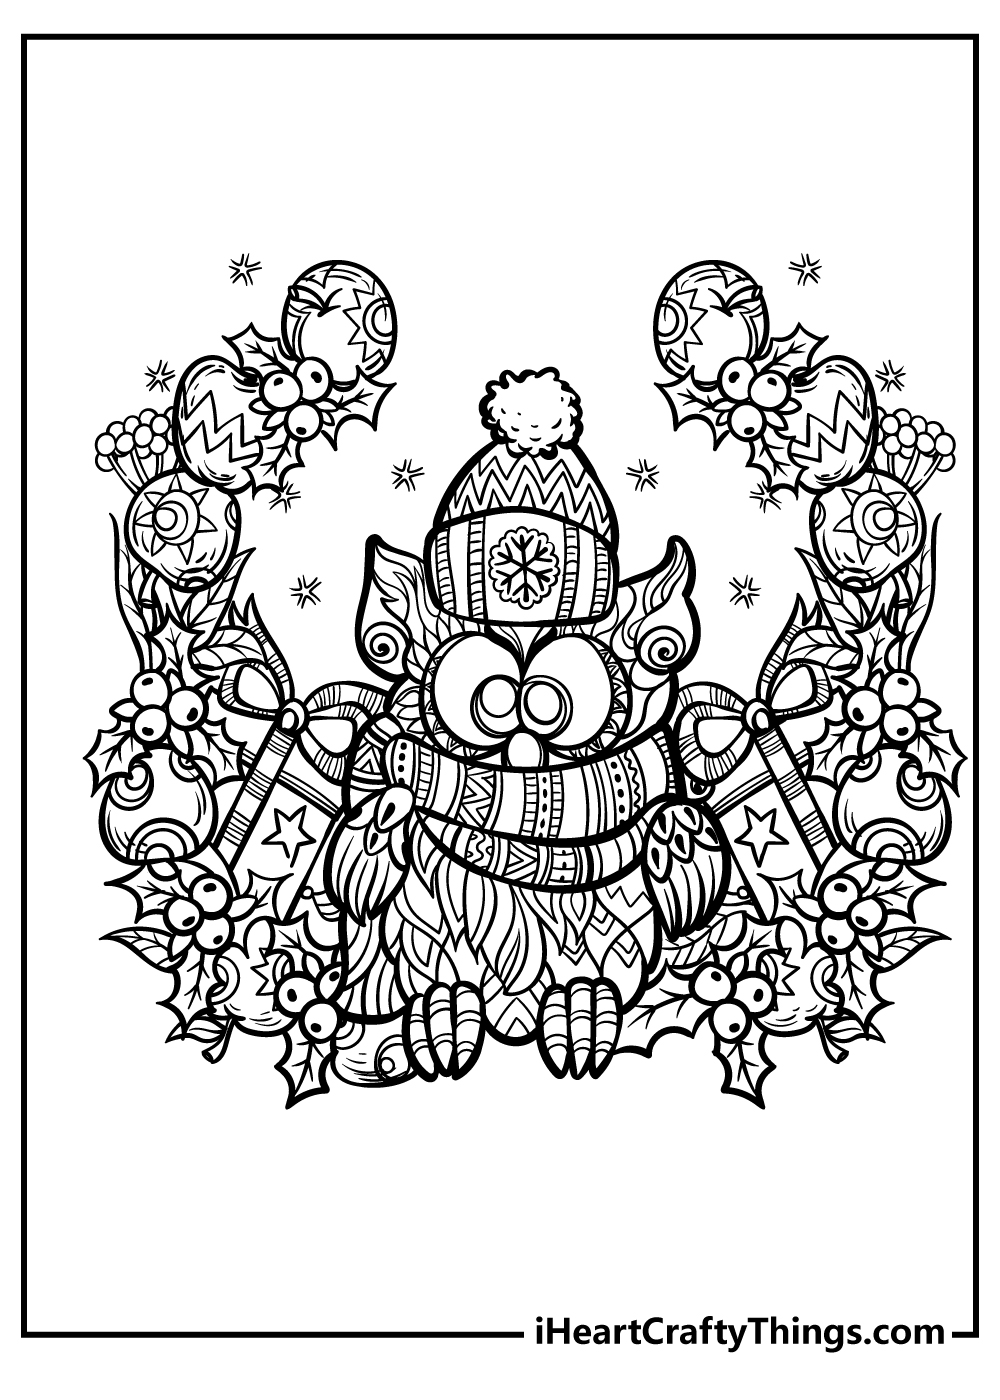 Christmas Coloring Pages free pdf download